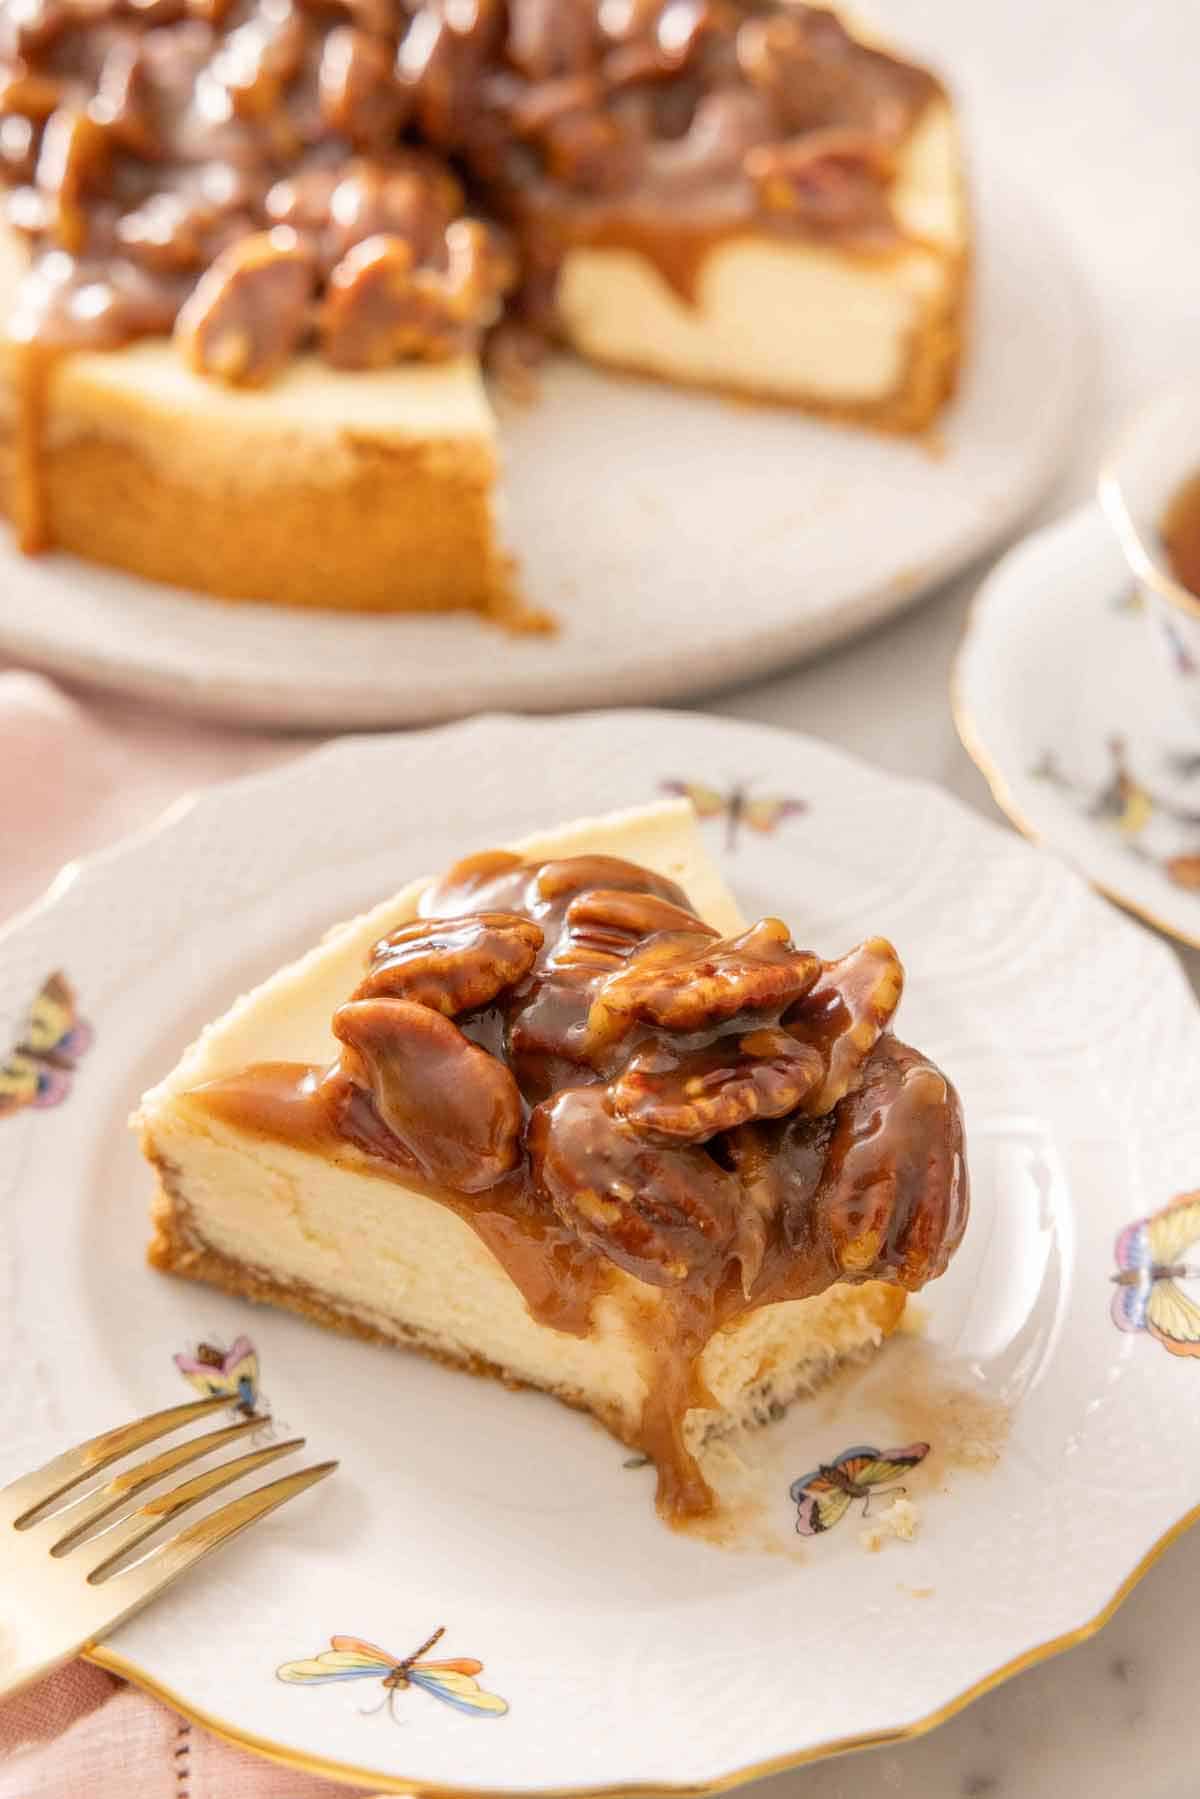 A slice of pecan pie cheesecake on a plate with a bite taken out. Rest of the cheesecake in the background.